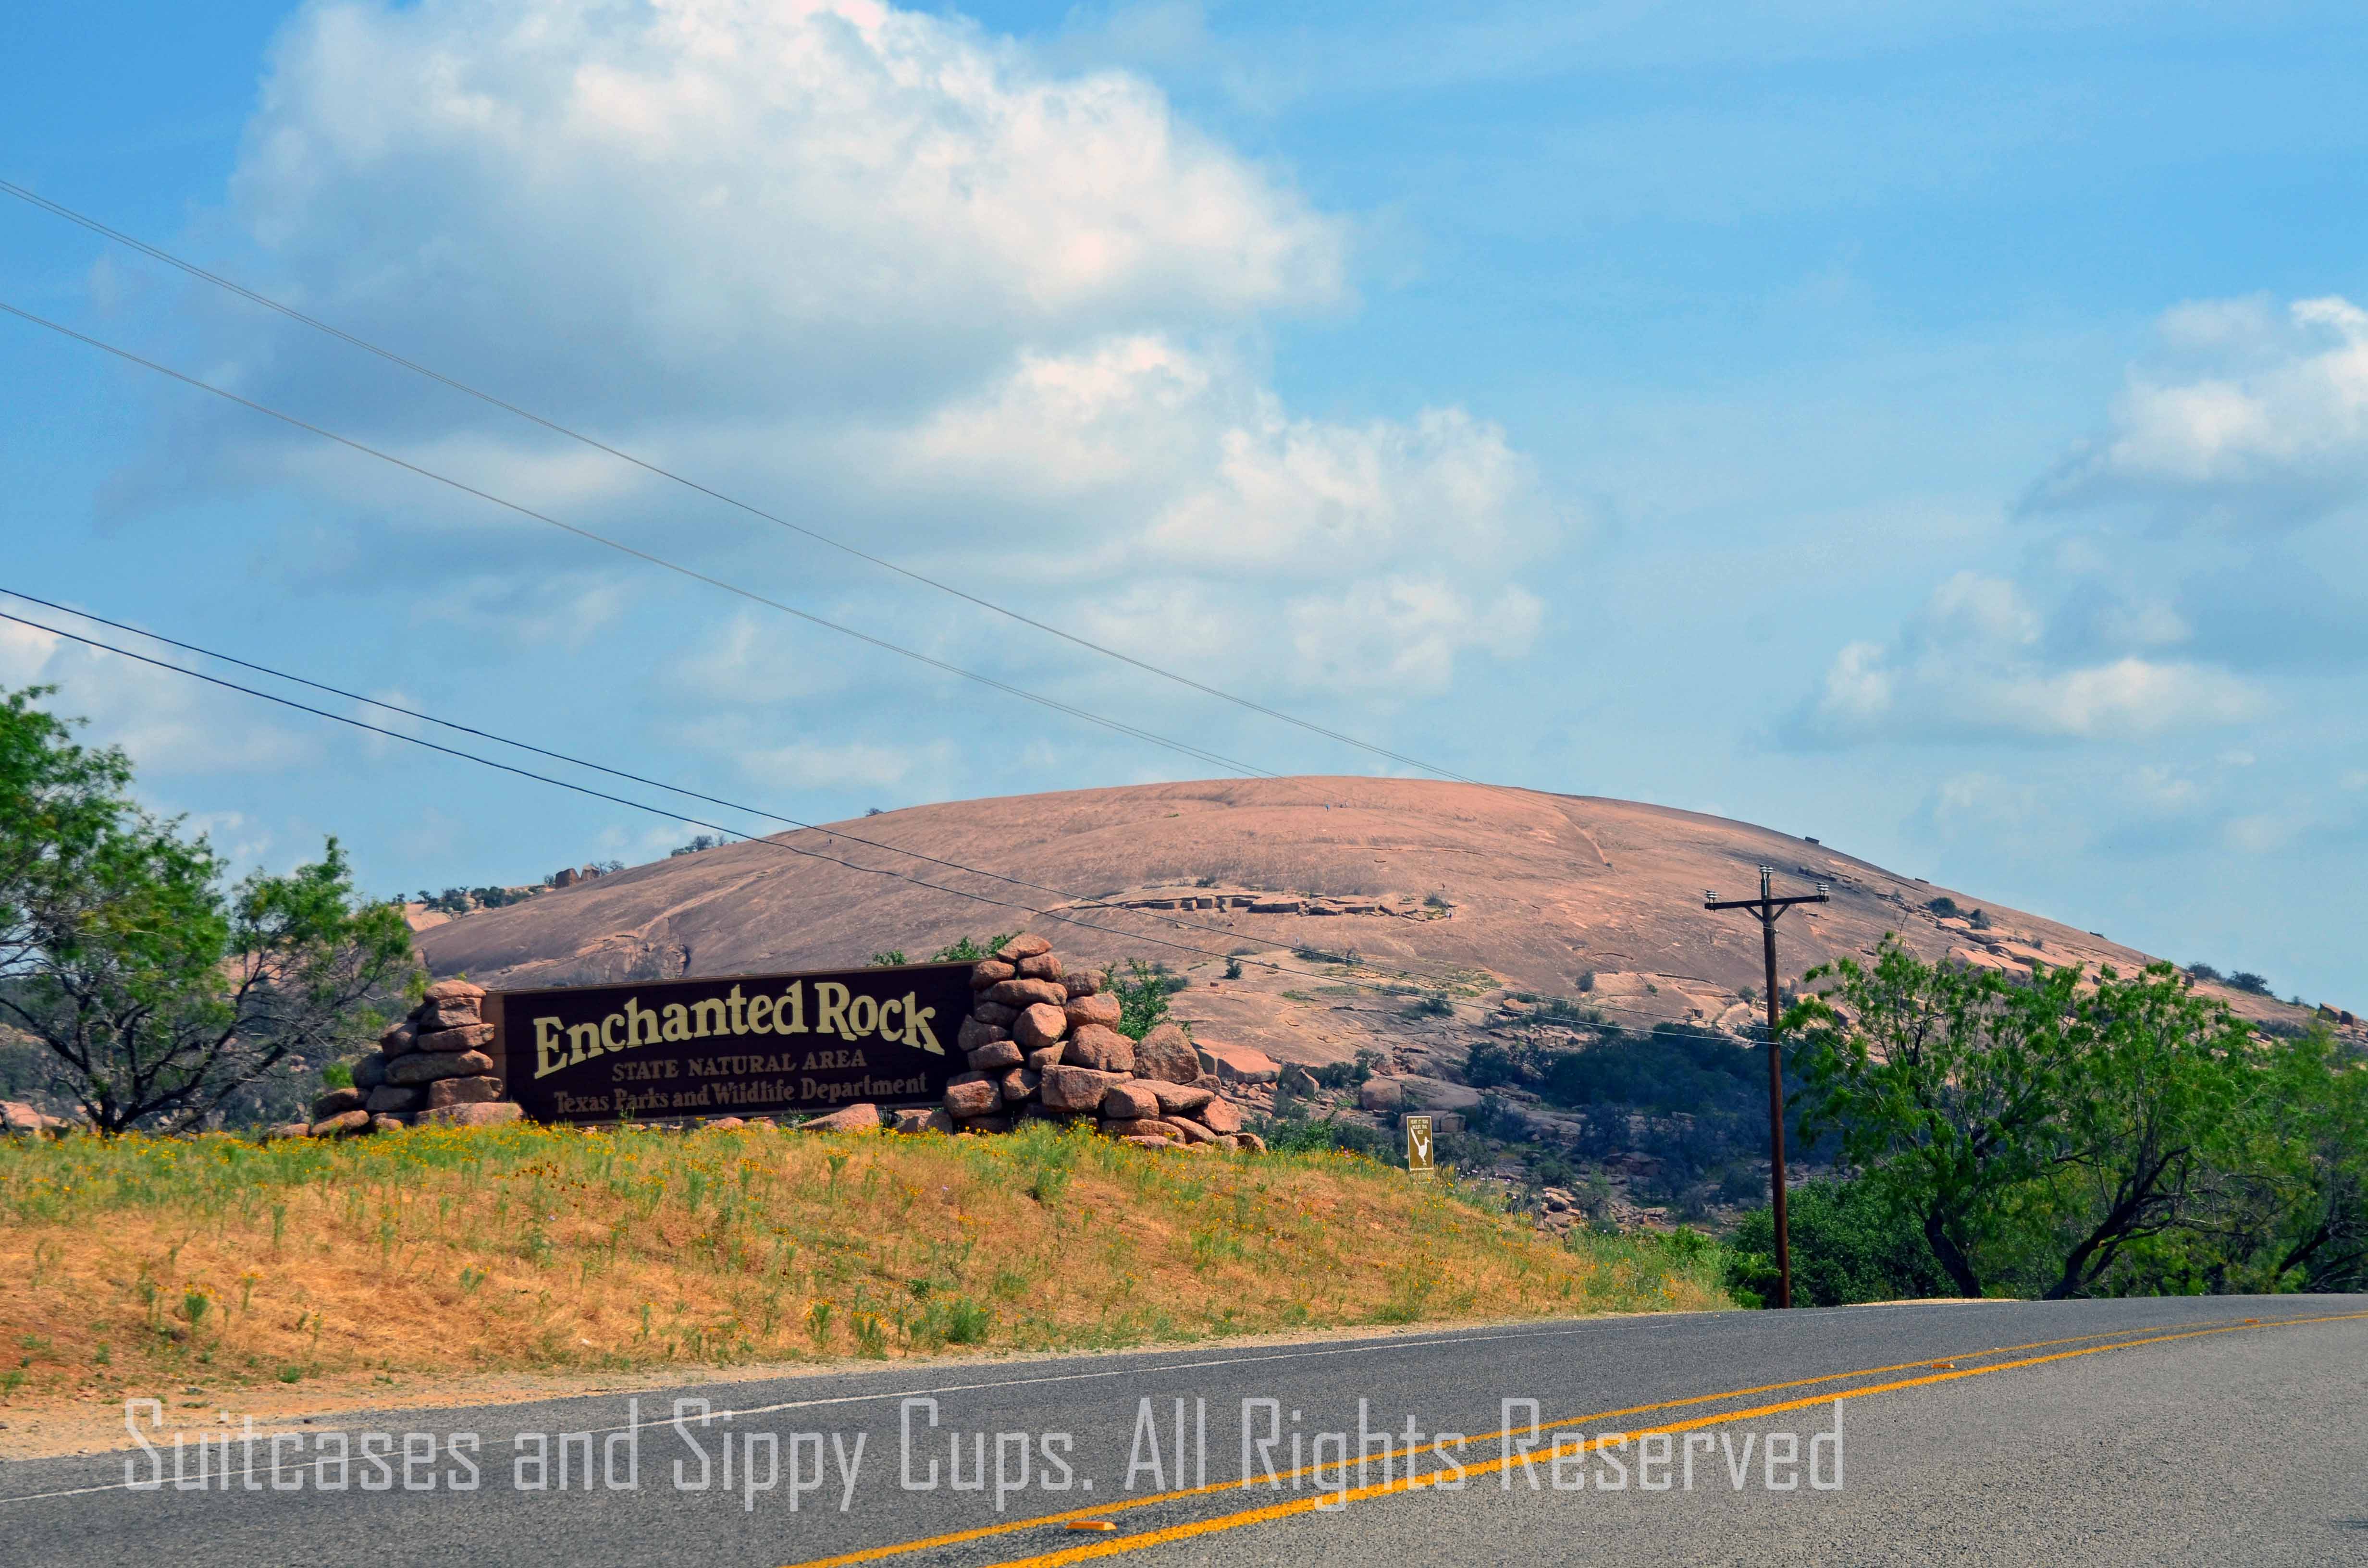 The Wimp’s Guide to Climbing Enchanted Rock